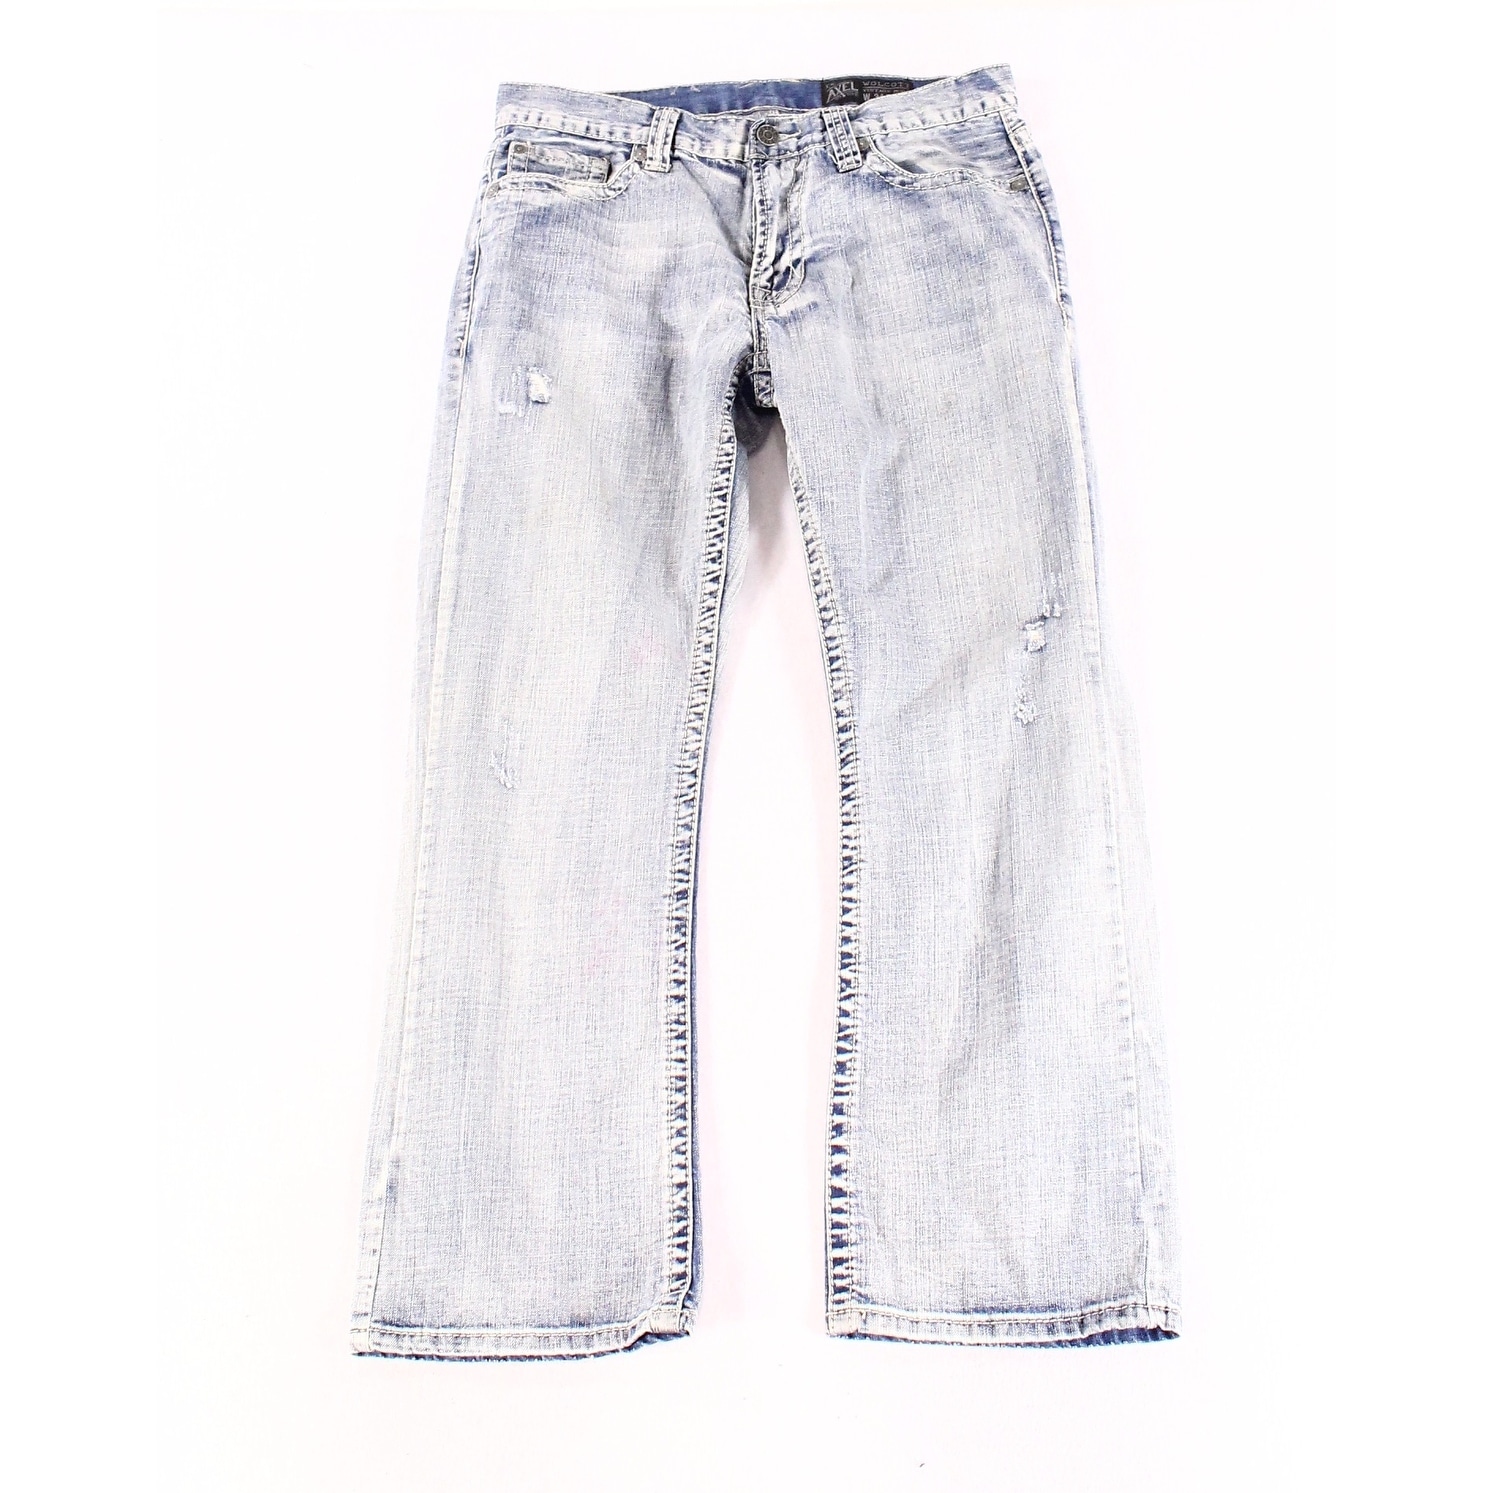 axel bootcut jeans